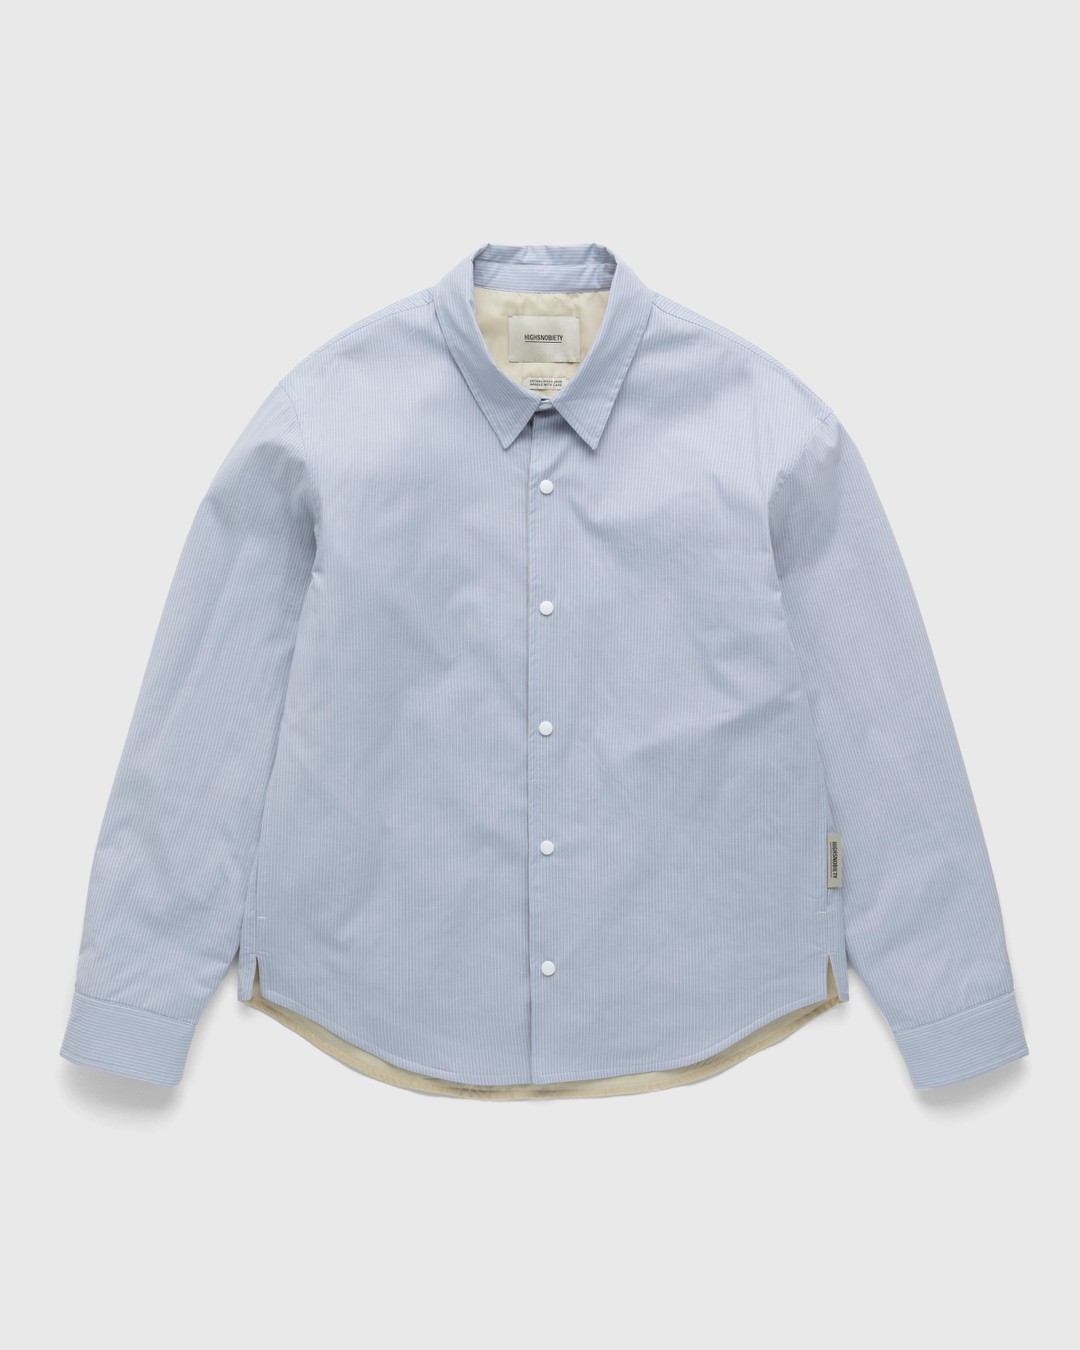 Highsnobiety – Quilted Insulated Shirt - Longsleeve Shirts - Blue - Image 1